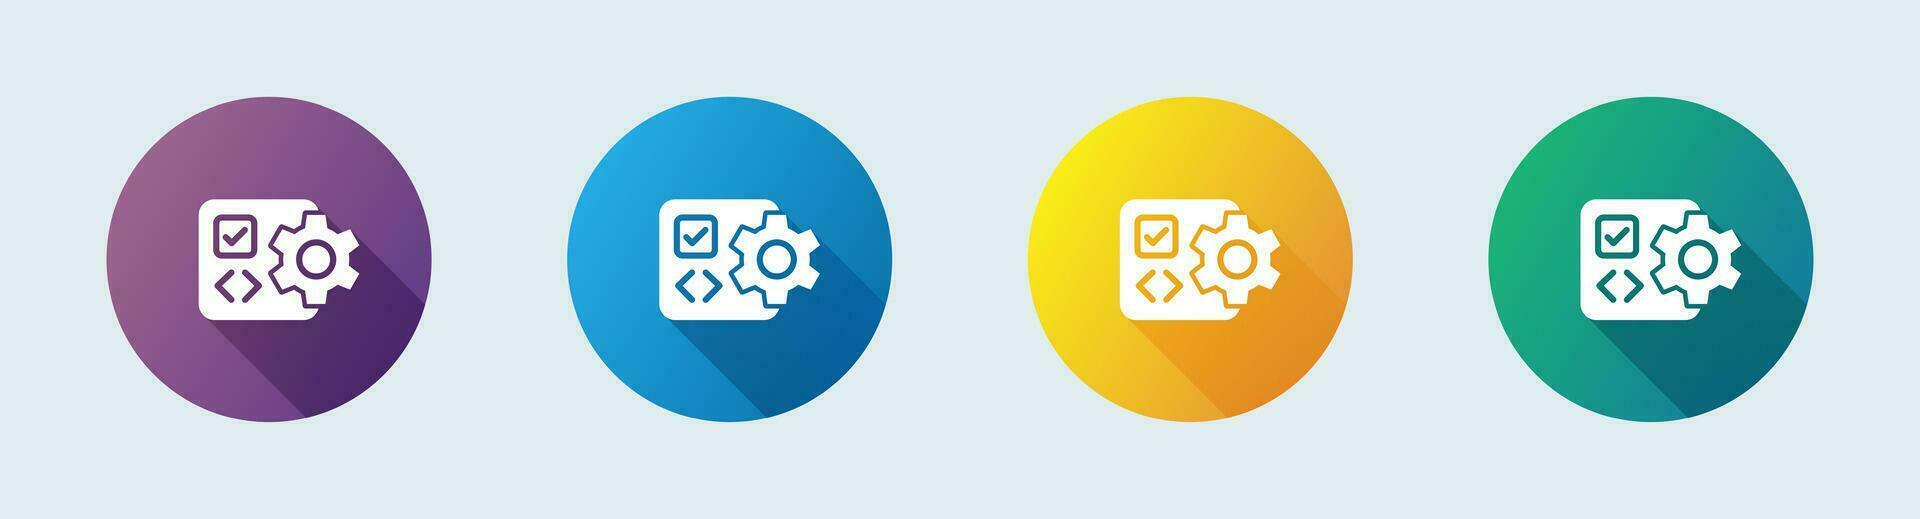 Software solid icon in flat design style. Application signs vector illustration.